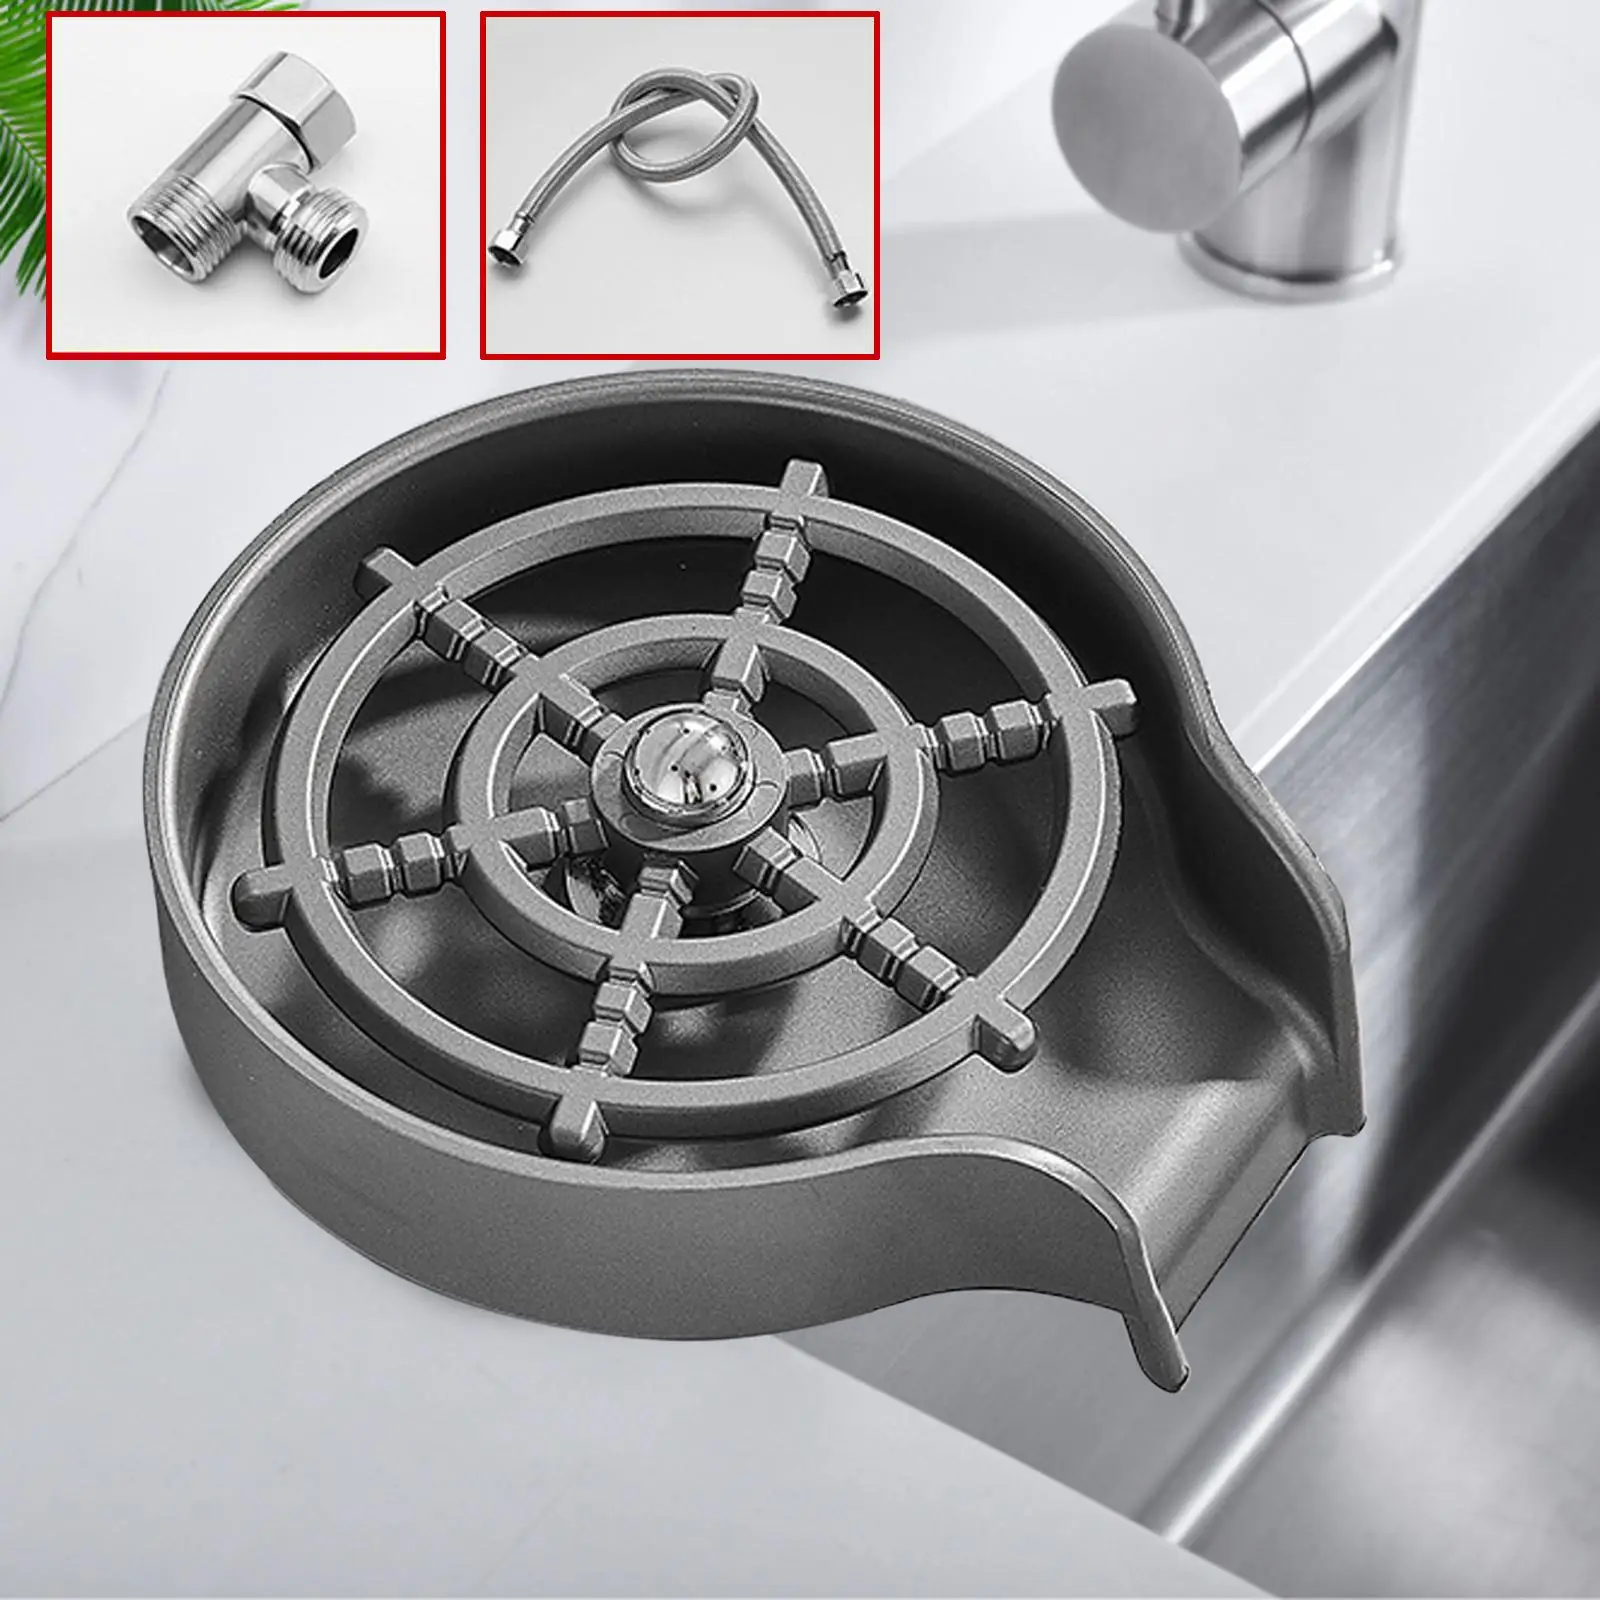 Kitchen Sink Automatic Flushing Device Kitchen Sink Cup Accessories High